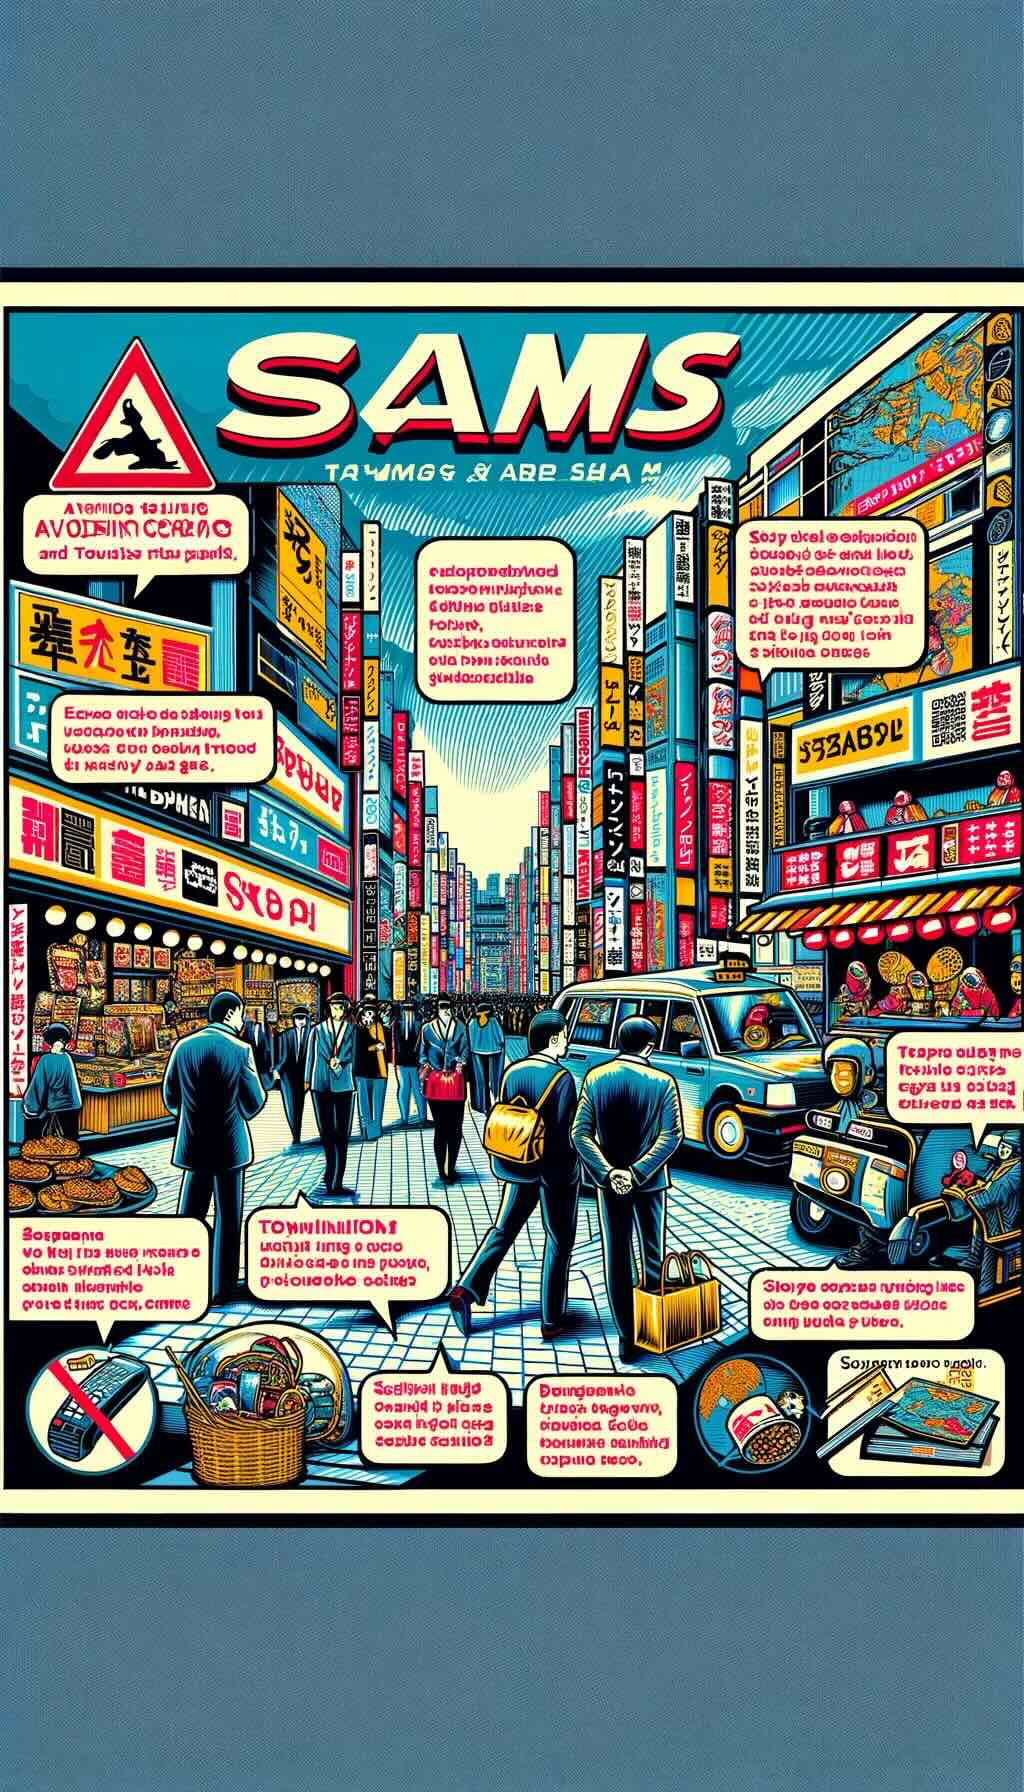 Importance of avoiding scams and tourist traps in Japan. It depicts common scenarios where tourists might encounter scams, such as overpriced souvenir shops, Roppongi bar scams, unofficial guides, and taxi scams. The artwork shows tourists exercising caution in these situations, being vigilant in crowded tourist areas, and using secure ATMs. It includes visual representations of staying informed, like reading reviews or consulting maps, and trusting instincts when situations feel dubious. The image also emphasizes preparation as a safety net, showing tourists keeping emergency contact numbers and being aware of their travel insurance coverage. This artwork conveys the message of awareness and vigilance, capturing the essence of a safe and informed travel experience in Japan